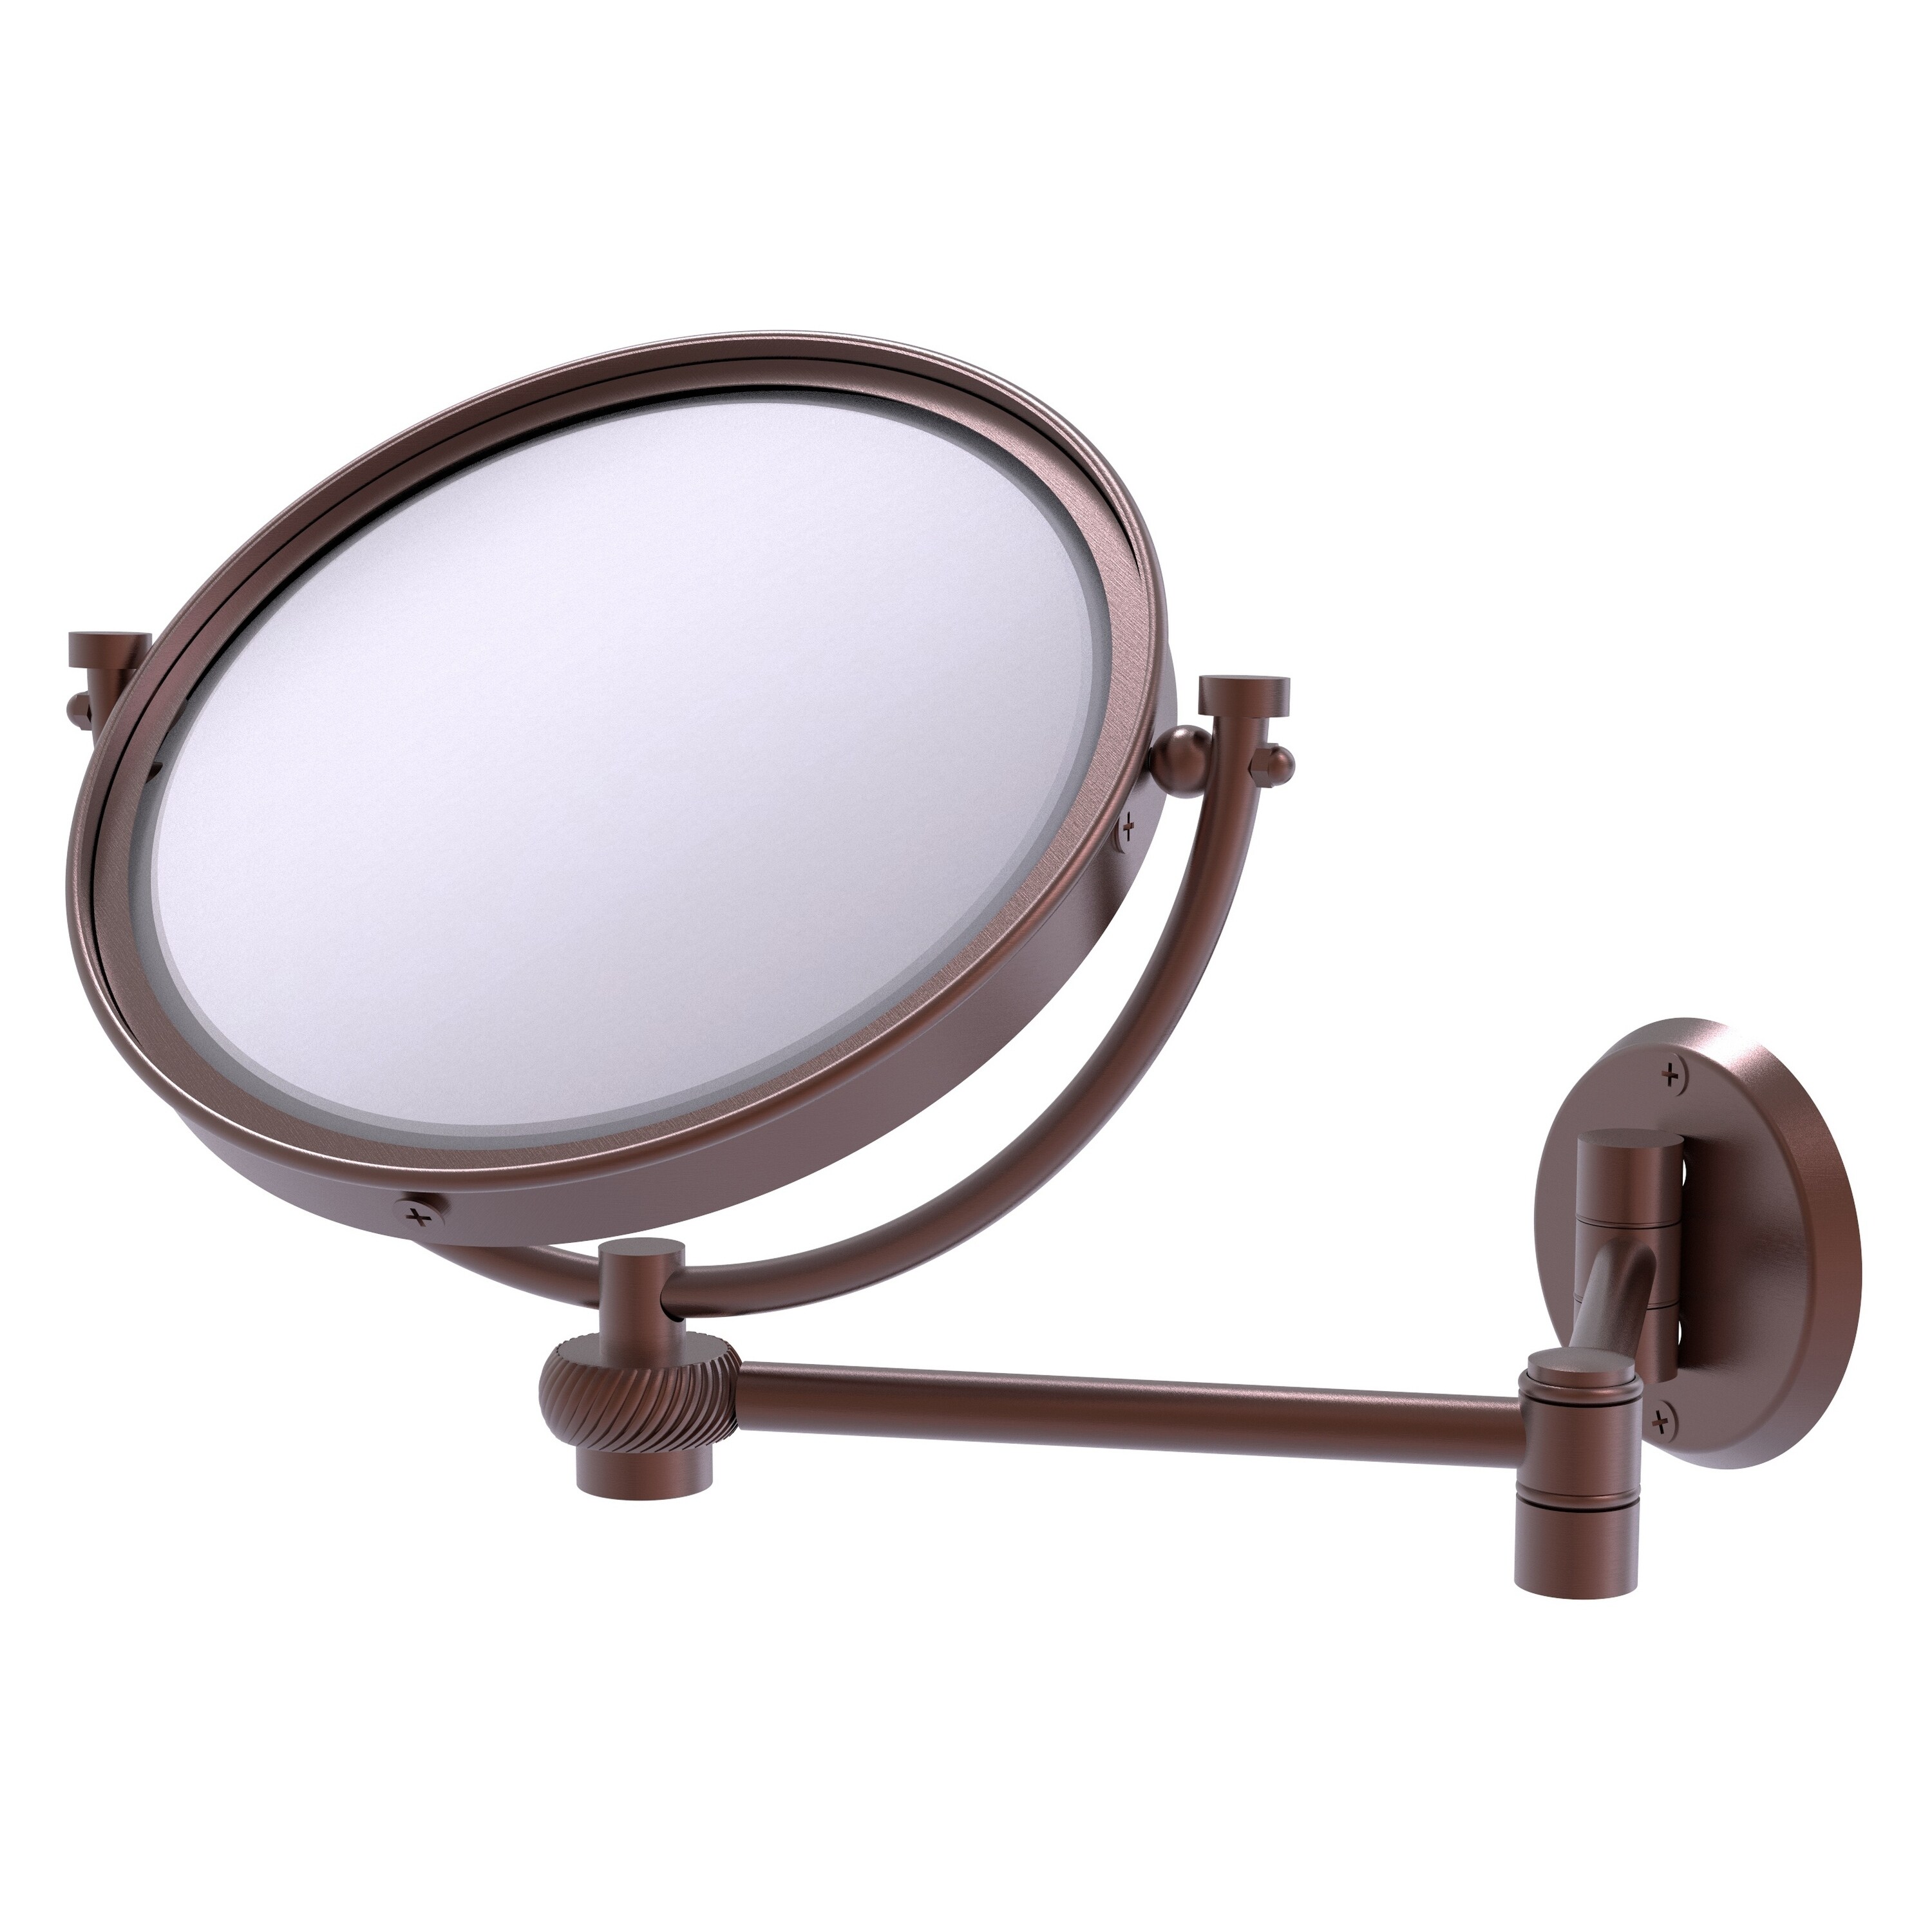 8-in x 10-in Antique Copper Double-sided 3X Magnifying Wall-mounted Vanity Mirror | - Allied Brass WM-6T/3X-CA